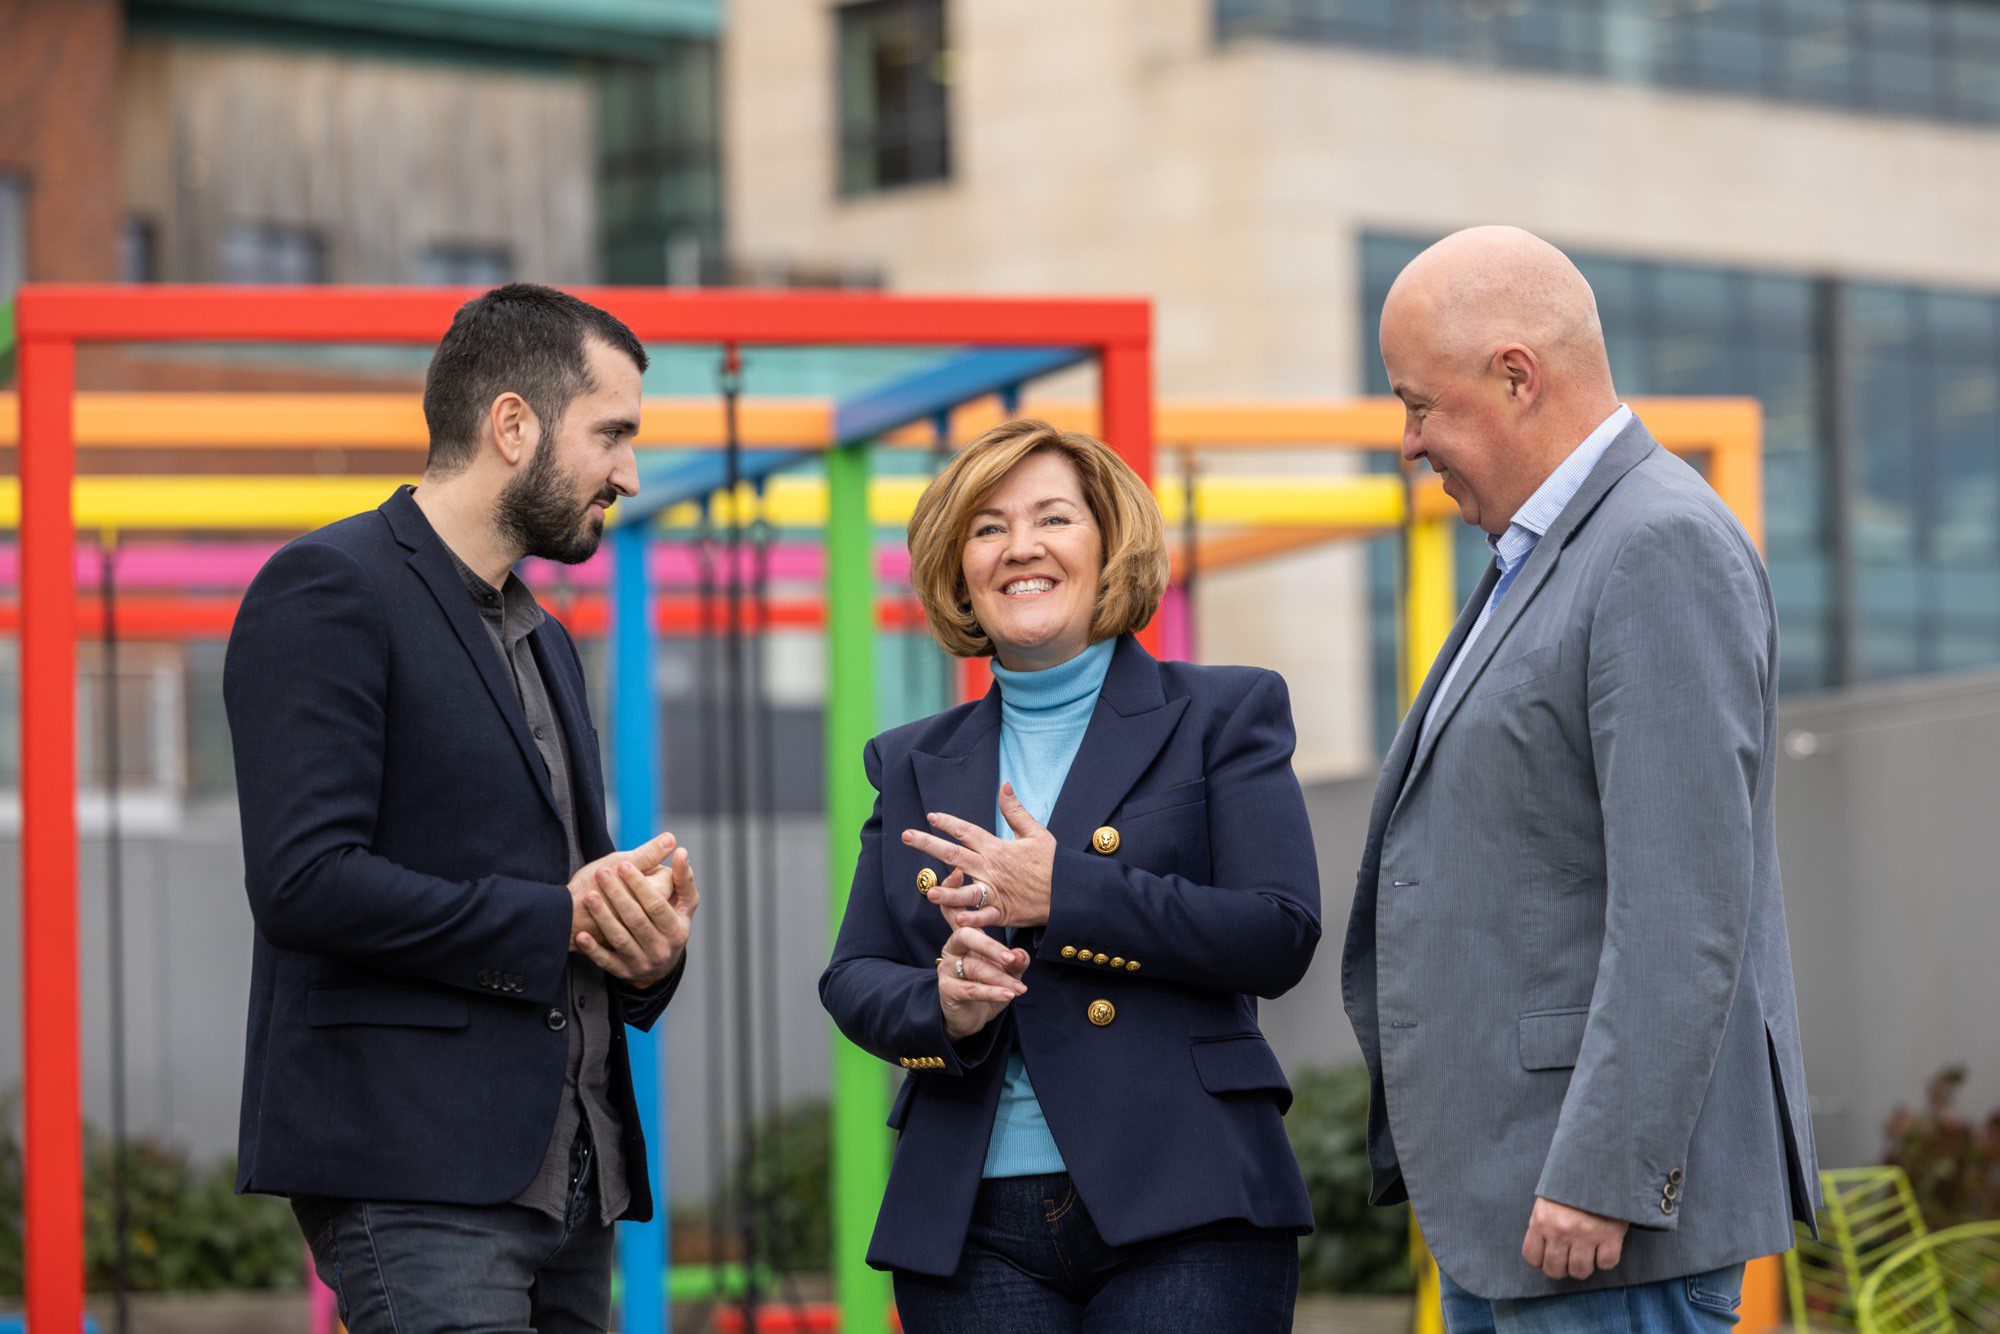 Changing Ireland Accelerator – delivering accelerated social change to Ireland’s underserved and underrepresented communities